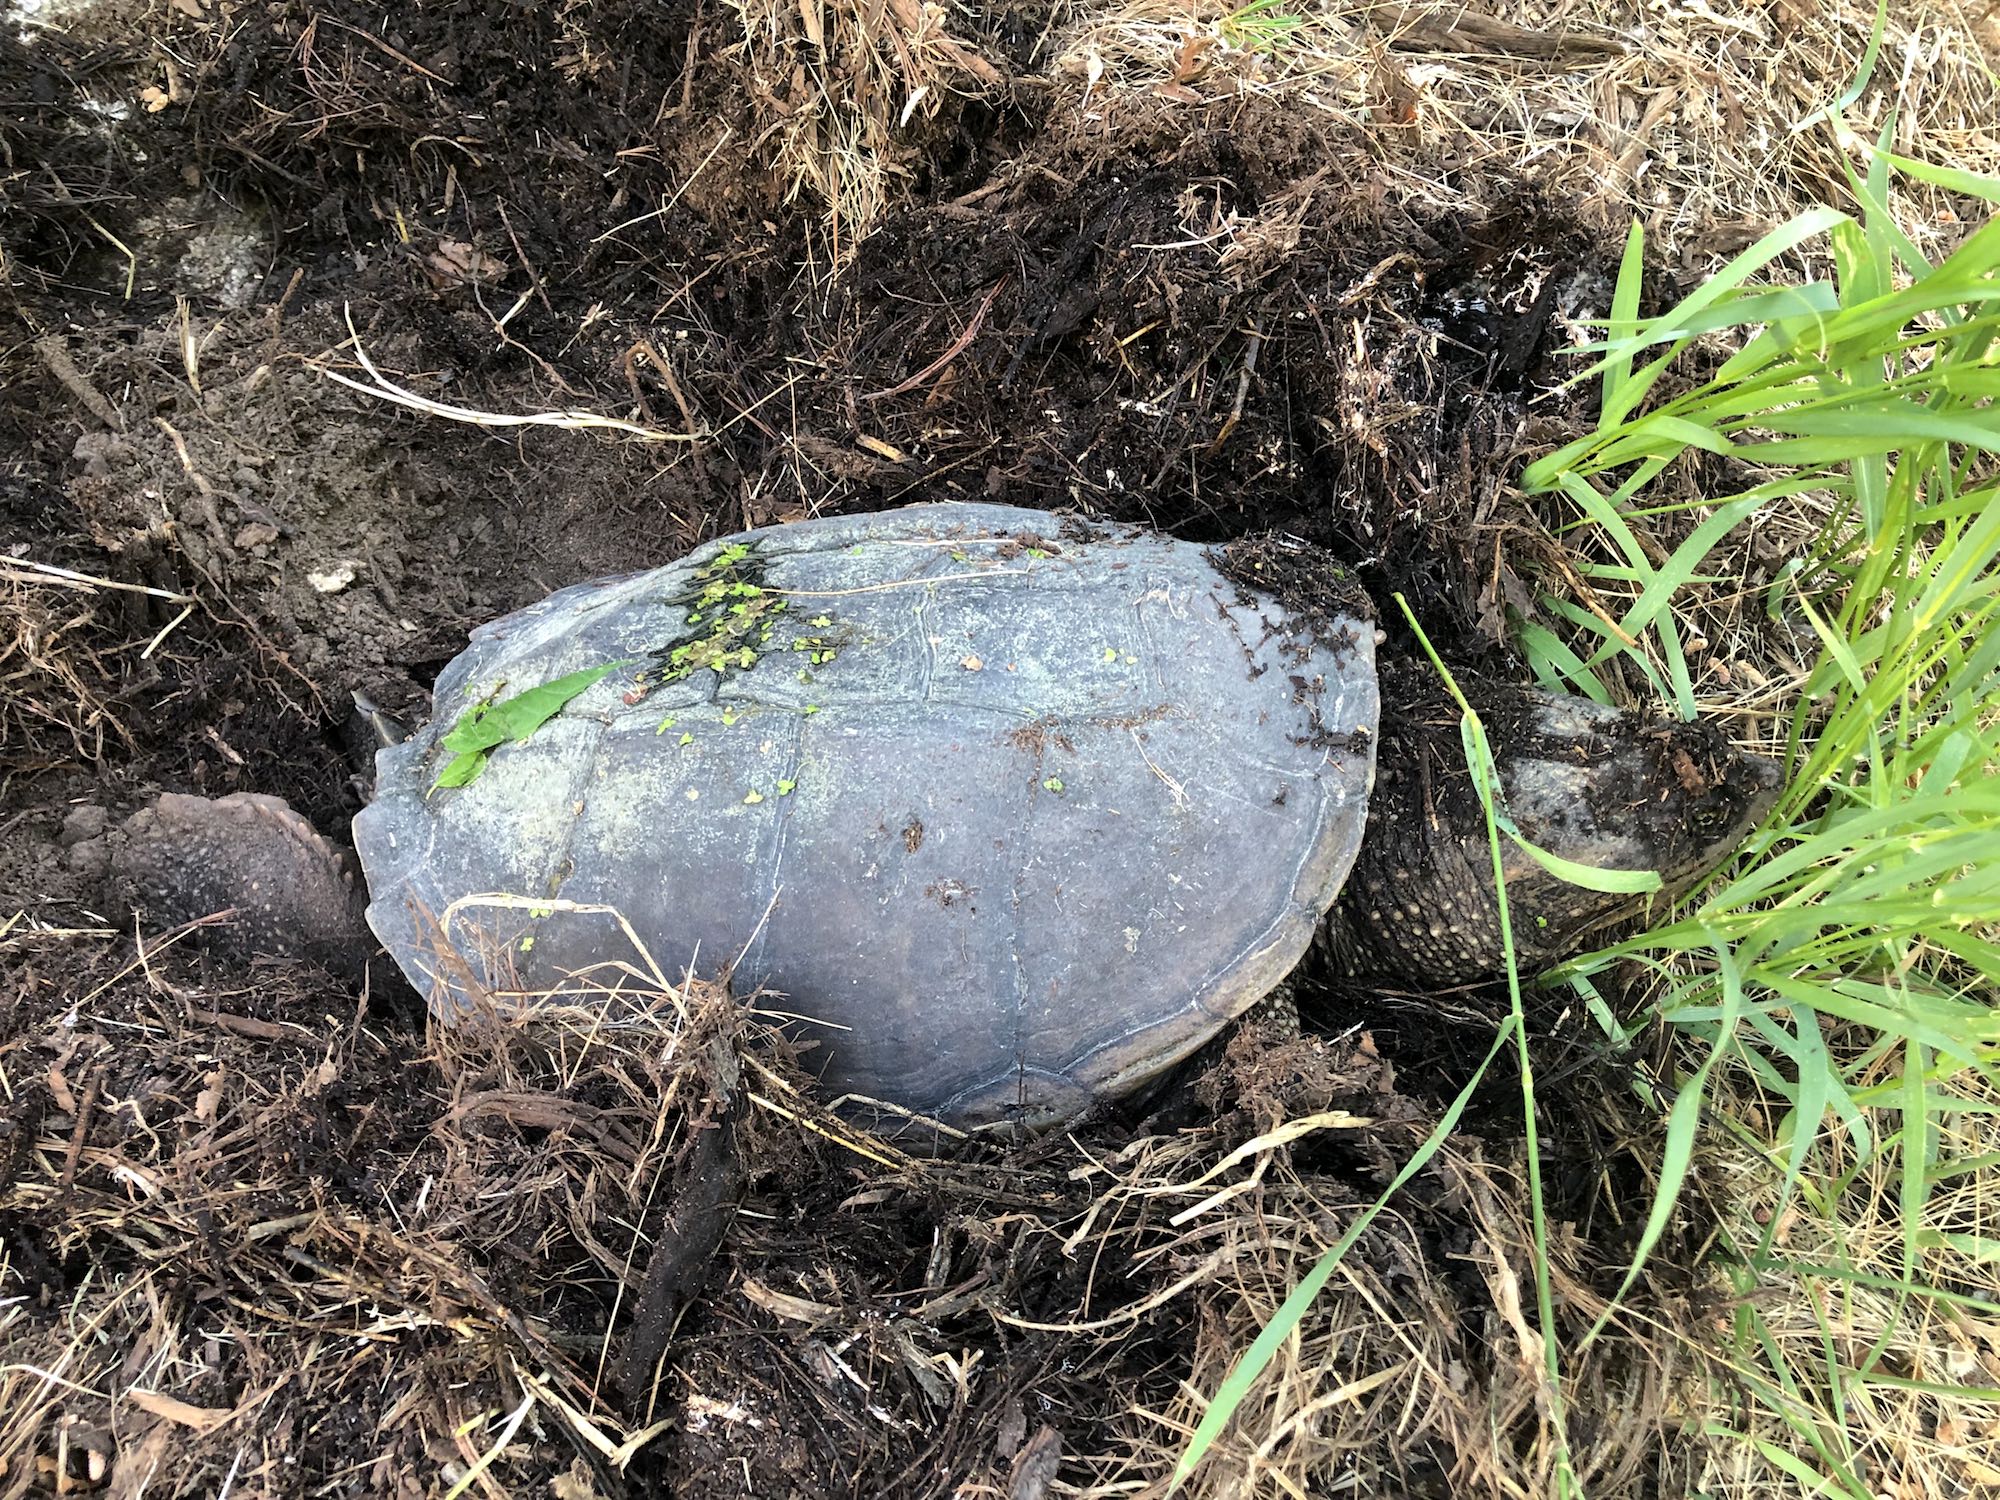 Snapping Turtle laying eggs along Arbor Drive in Madison, Wisconsin on June 15, 2019.